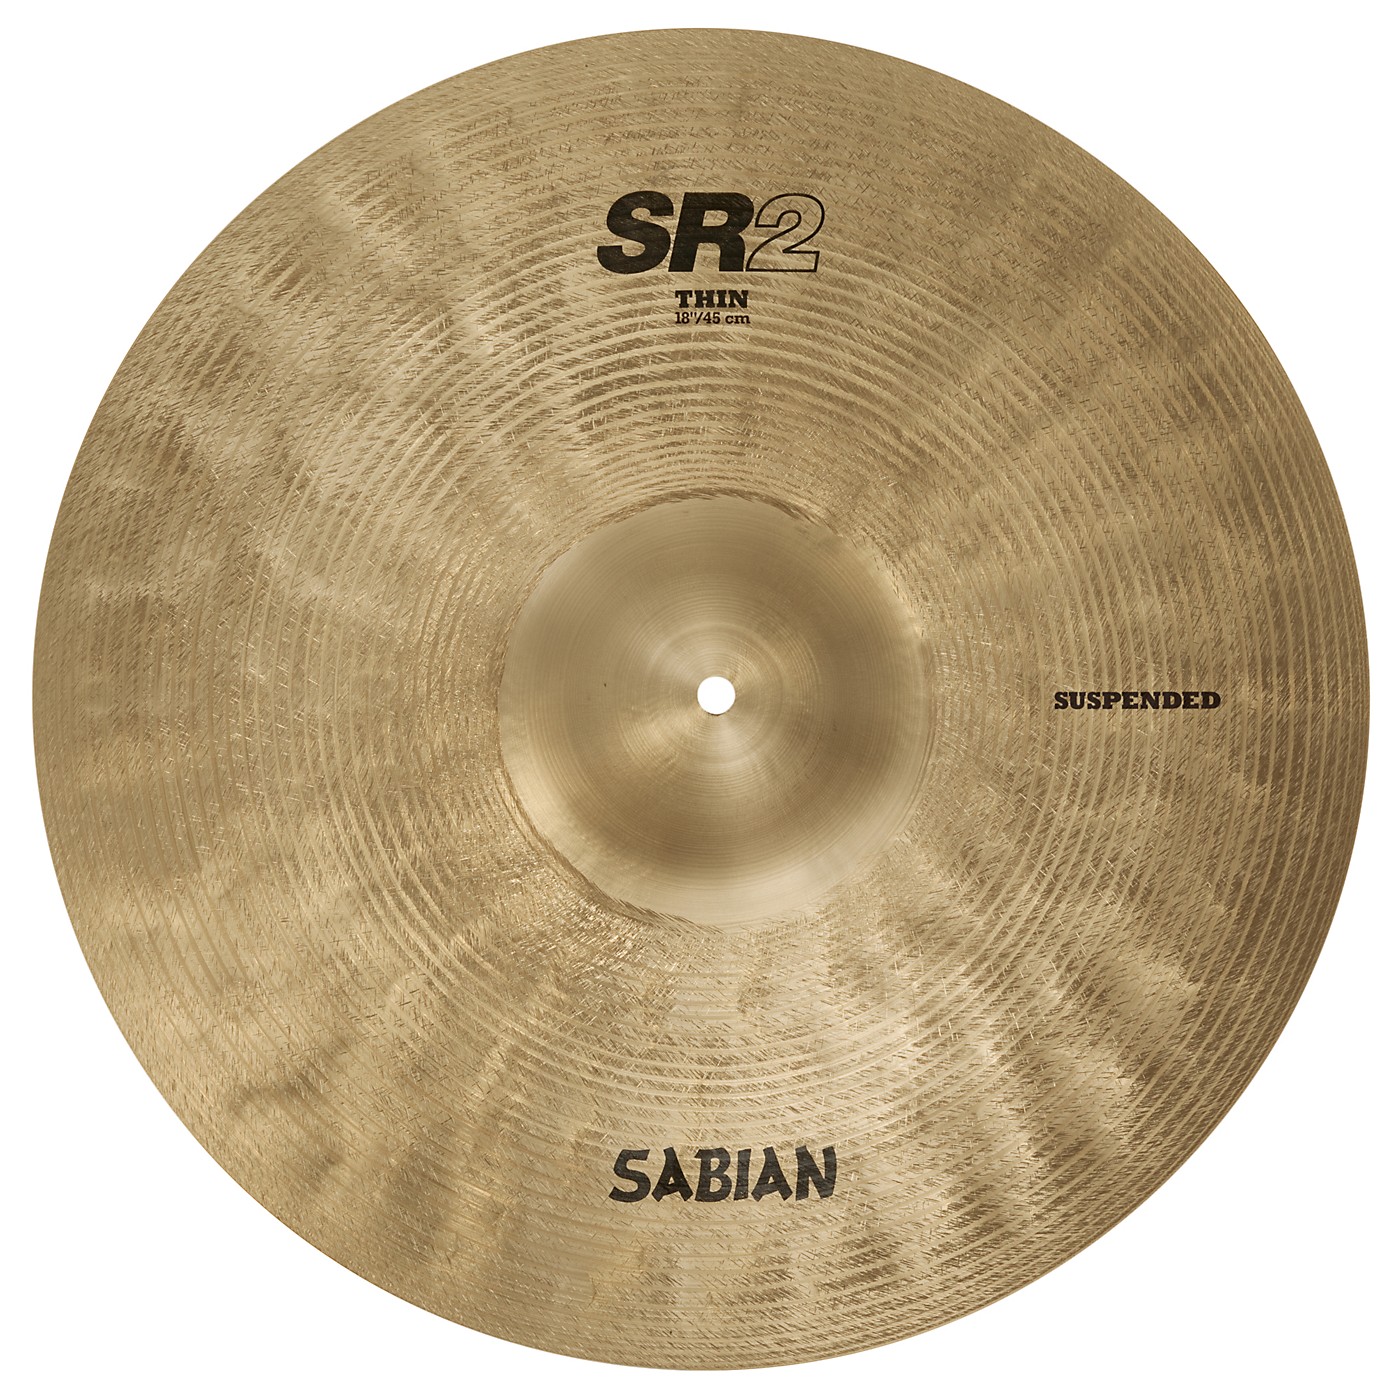 Sabian SR2 Suspended Cymbal 20